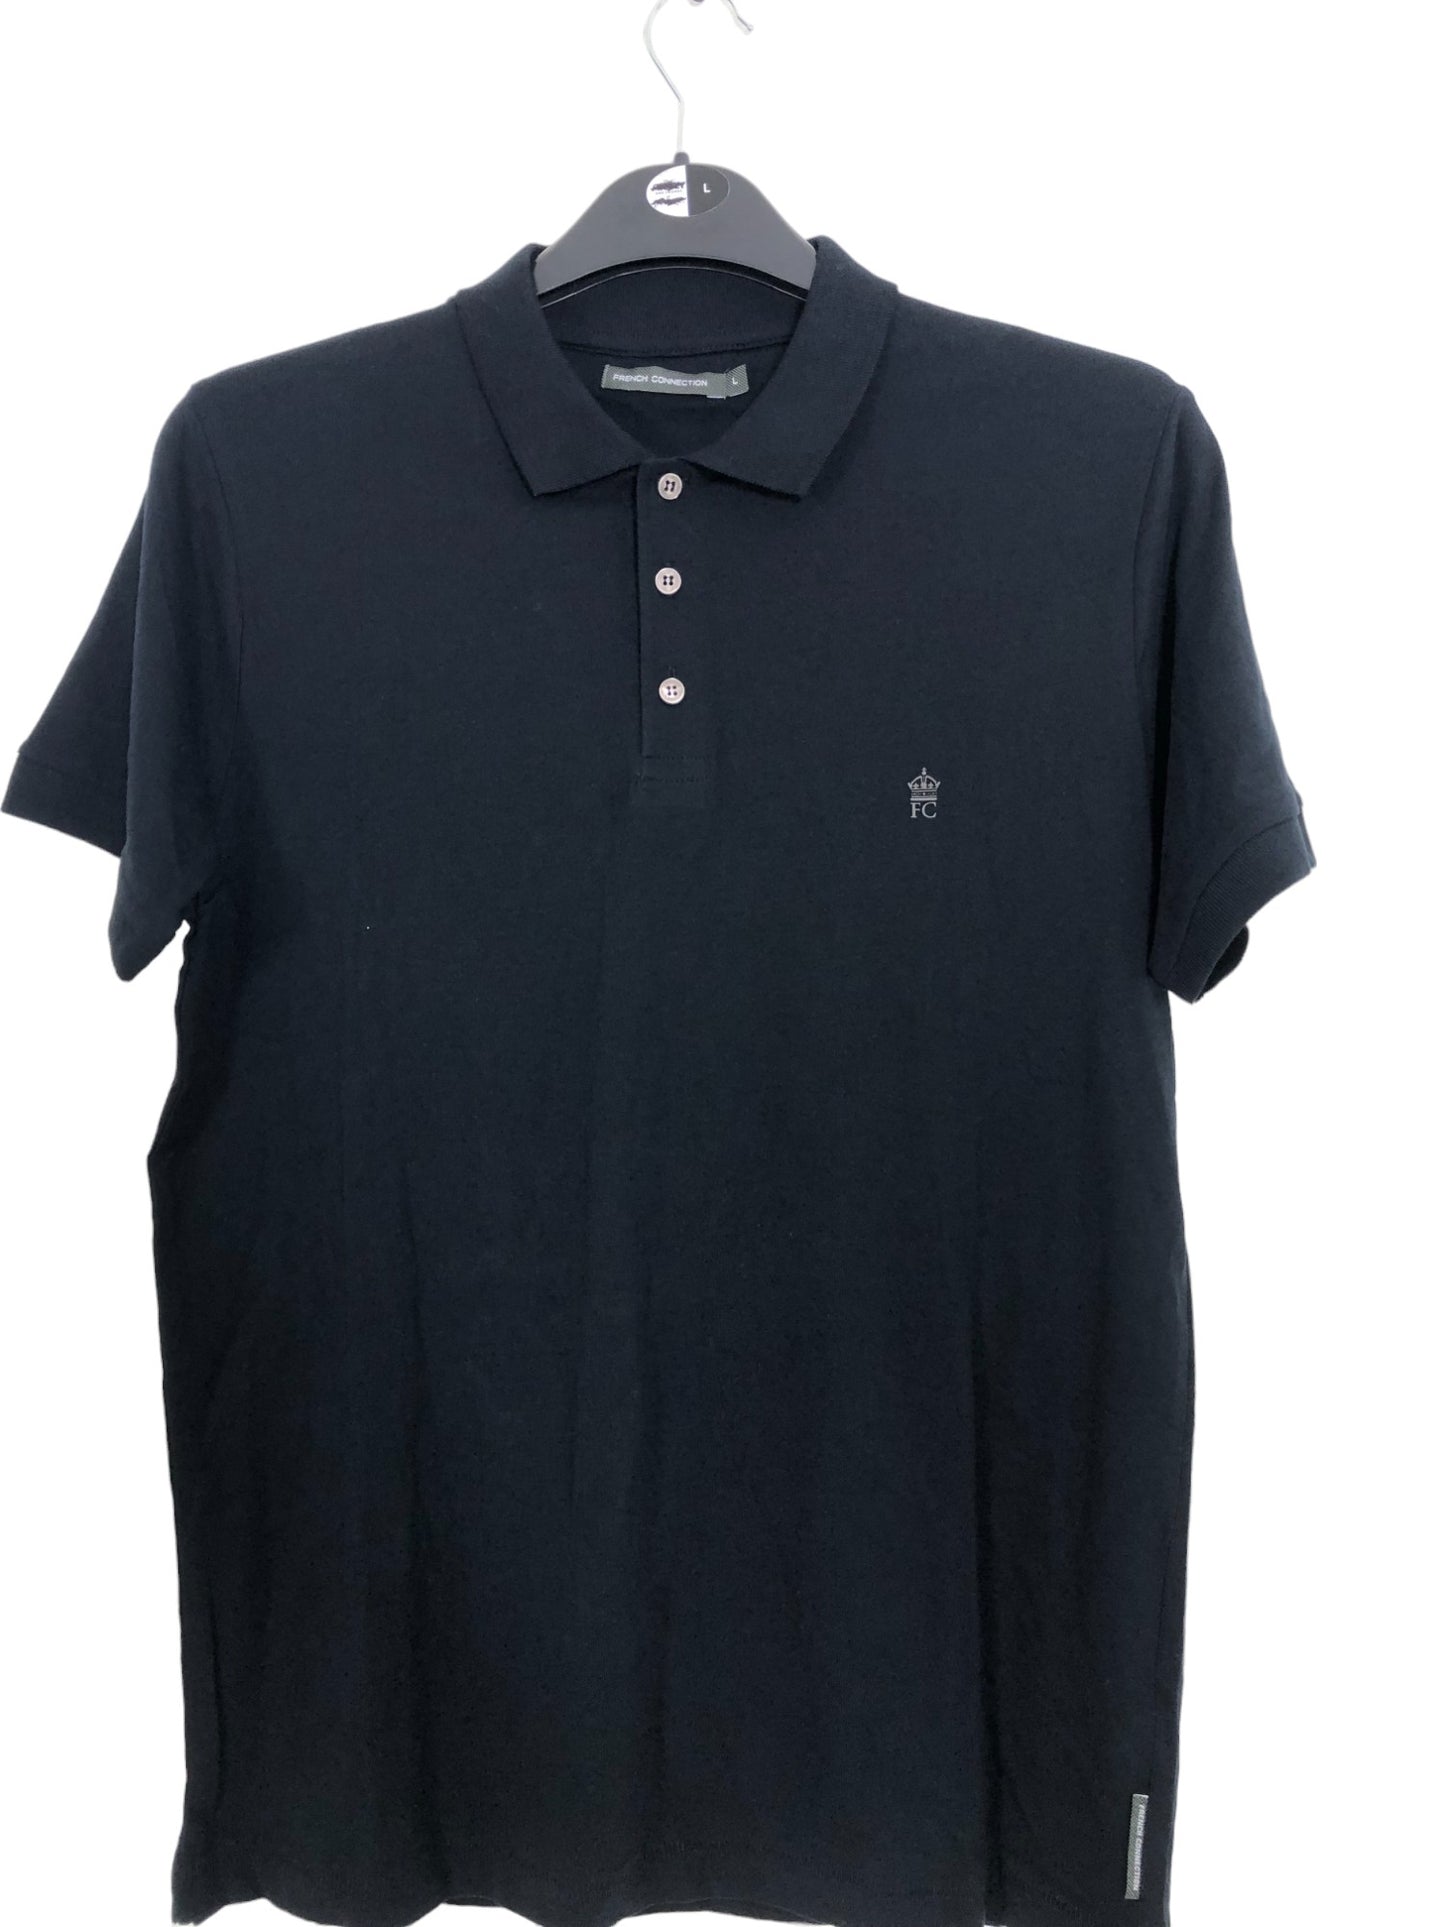 Men's French Connection Polo Shirt